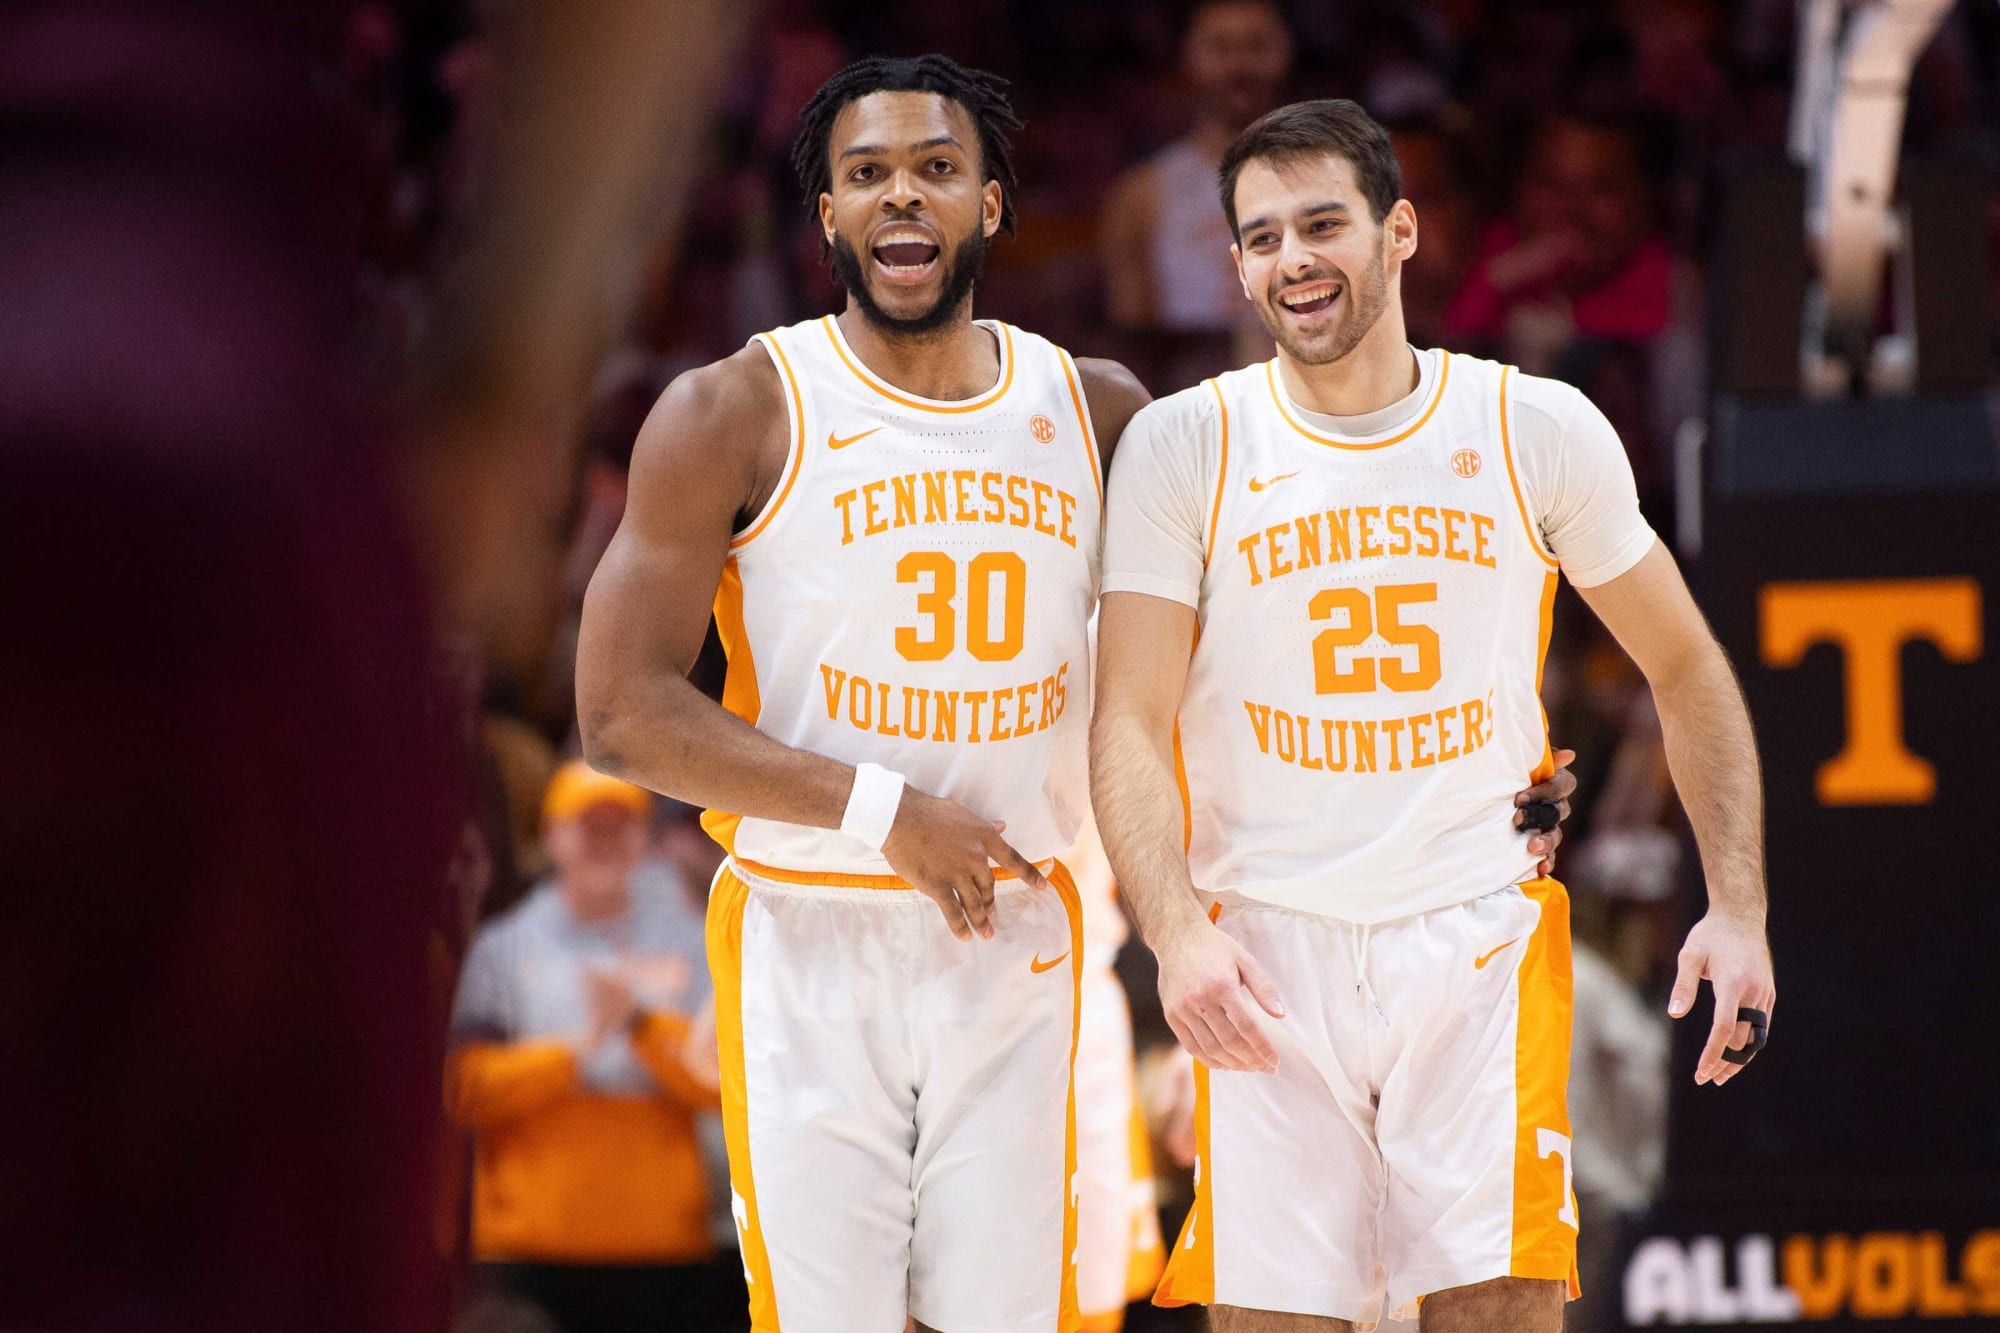 A closer look at Tennessee's new alternate basketball uniform